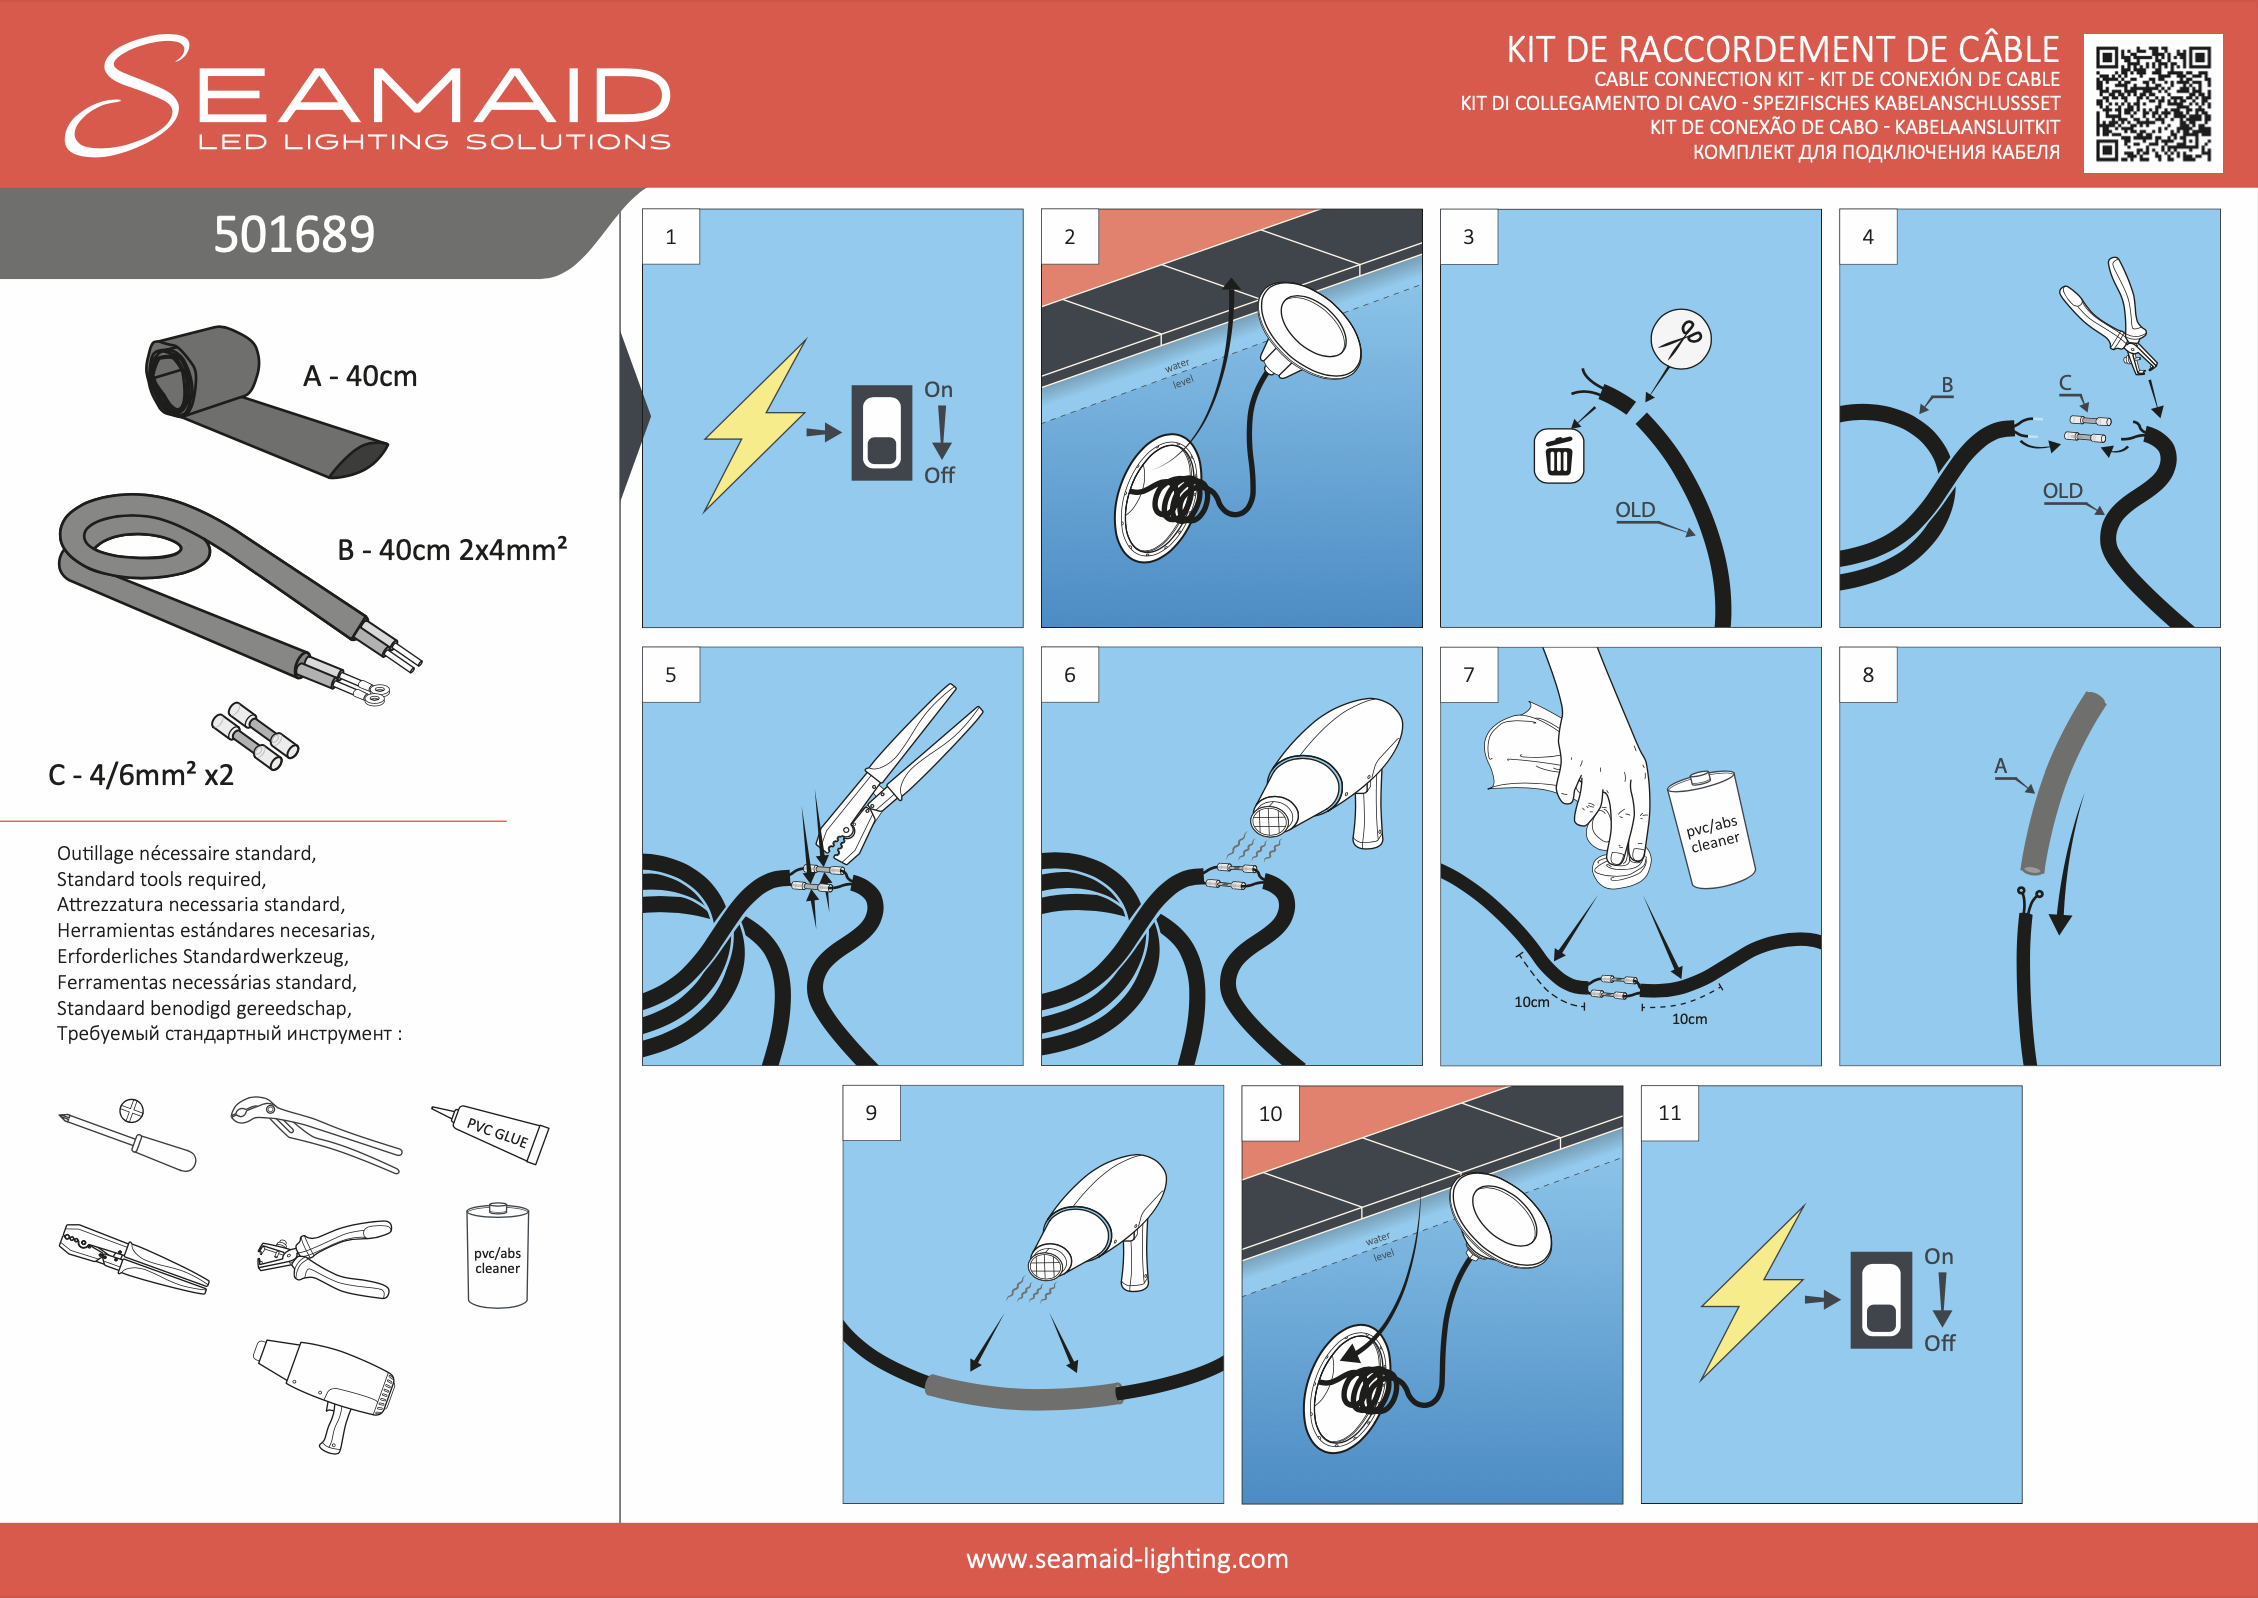 Seamaid special renovation cable connection set with 40cm cable 2x4mm²